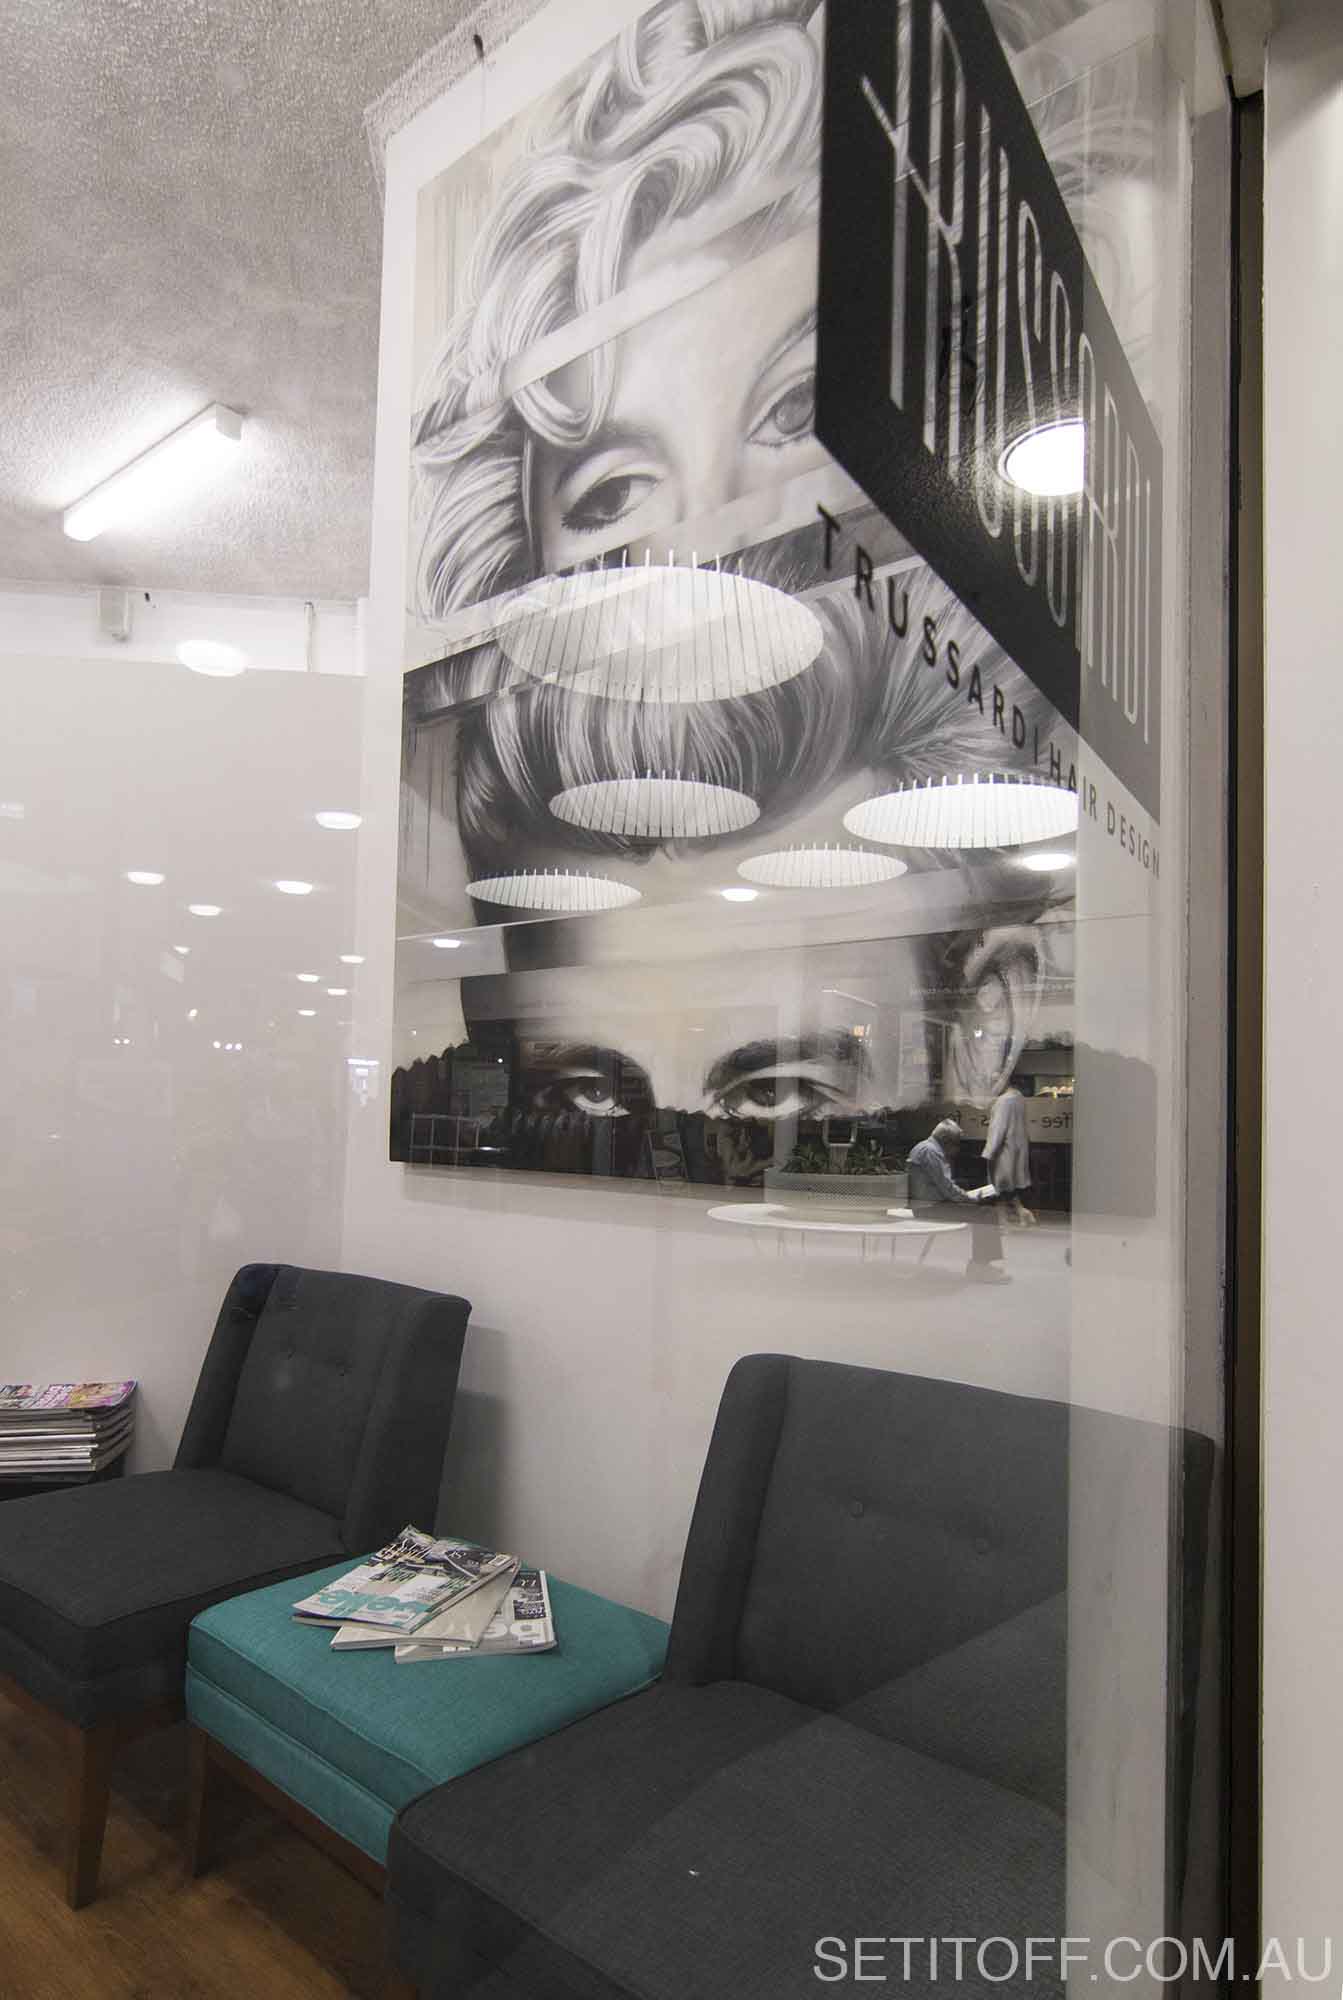 Portrait of Marilyn Monroe and James Dean on a canvas in hair salon